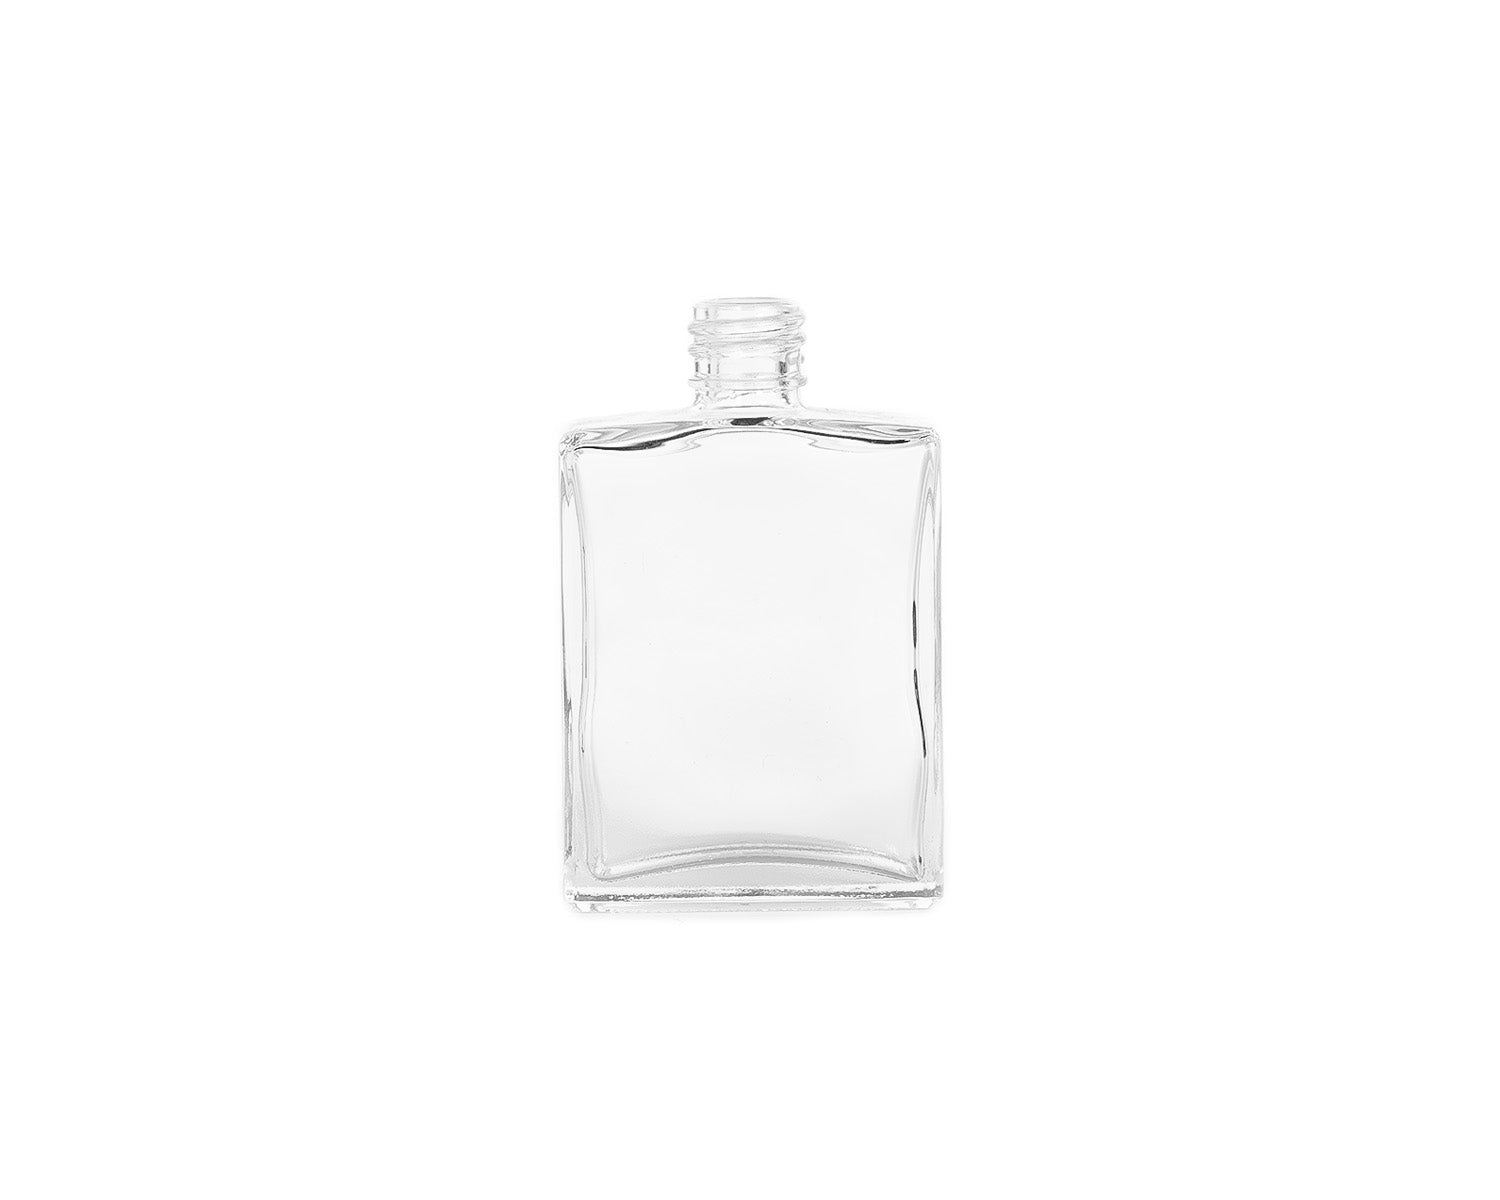 H&D HYALINE & DORA Clear Crystal Cut Perfume Bottle with Stopper Empty  Refillable Glass Bottle,Gift Boxed